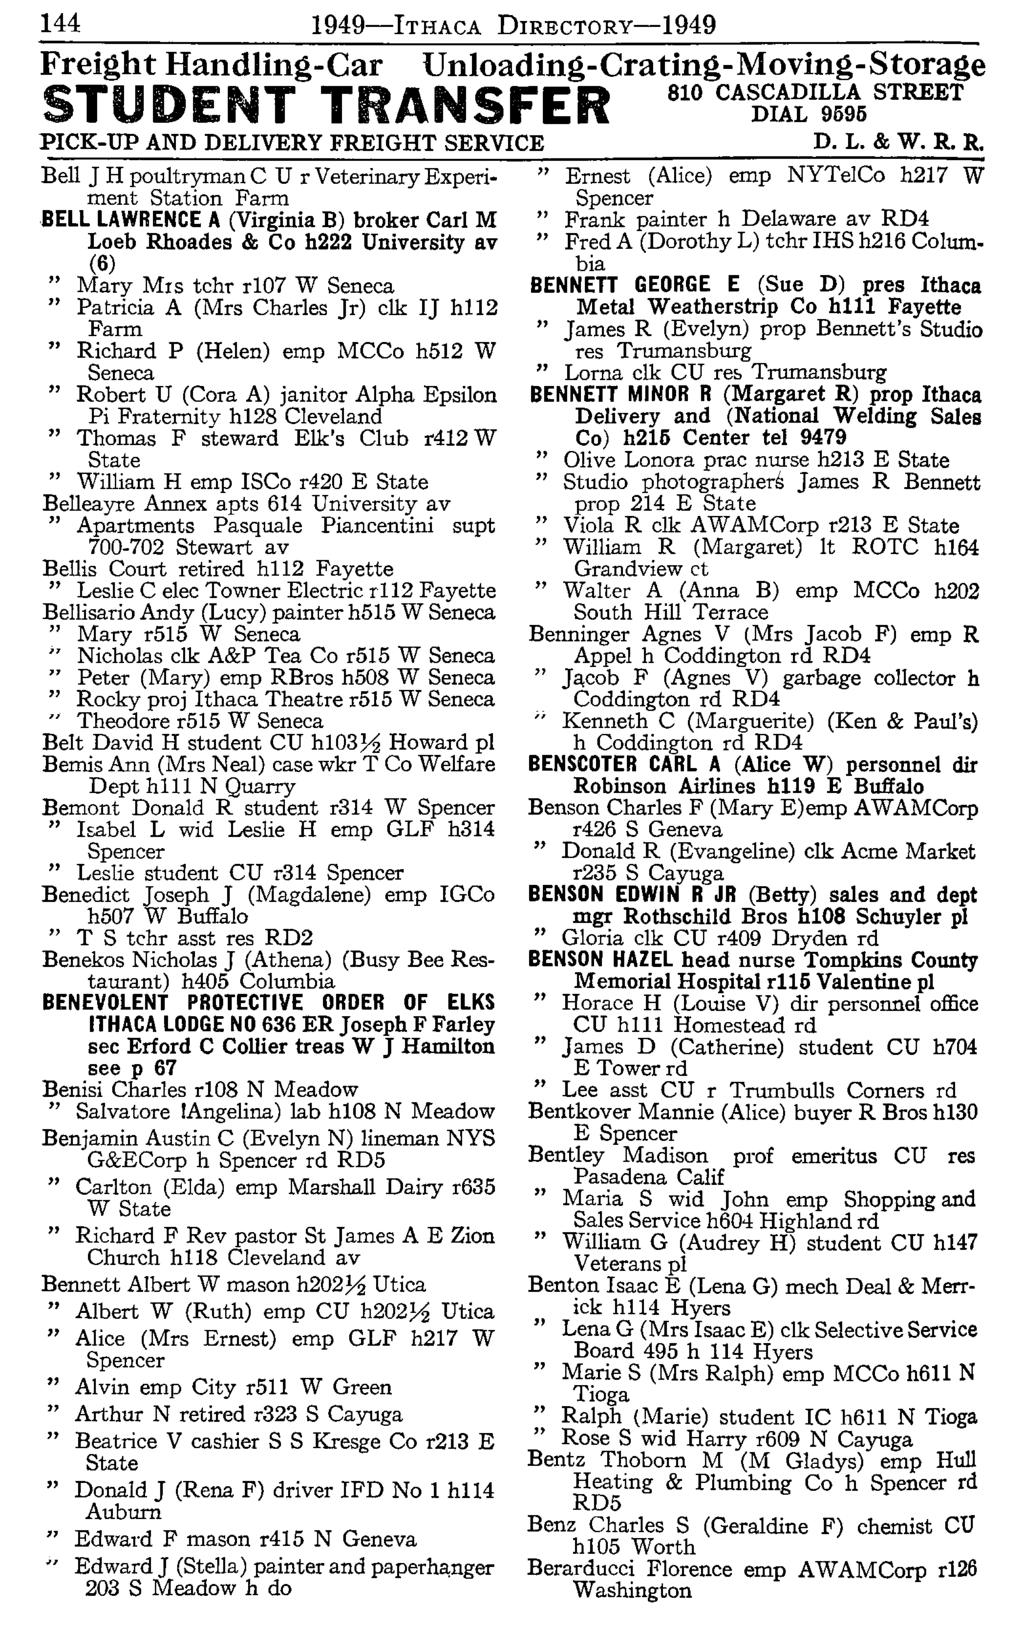 144 1949-lTHAcA DIRECTORy-1949 Freight Handling-Car STUDENT TRANSFER Unloading-Crating-Moving-Storage S10 CA~1~I~~~STREET PICK-UP AND DELIVERY FREIGHT SERVICE D. L. & W. R.